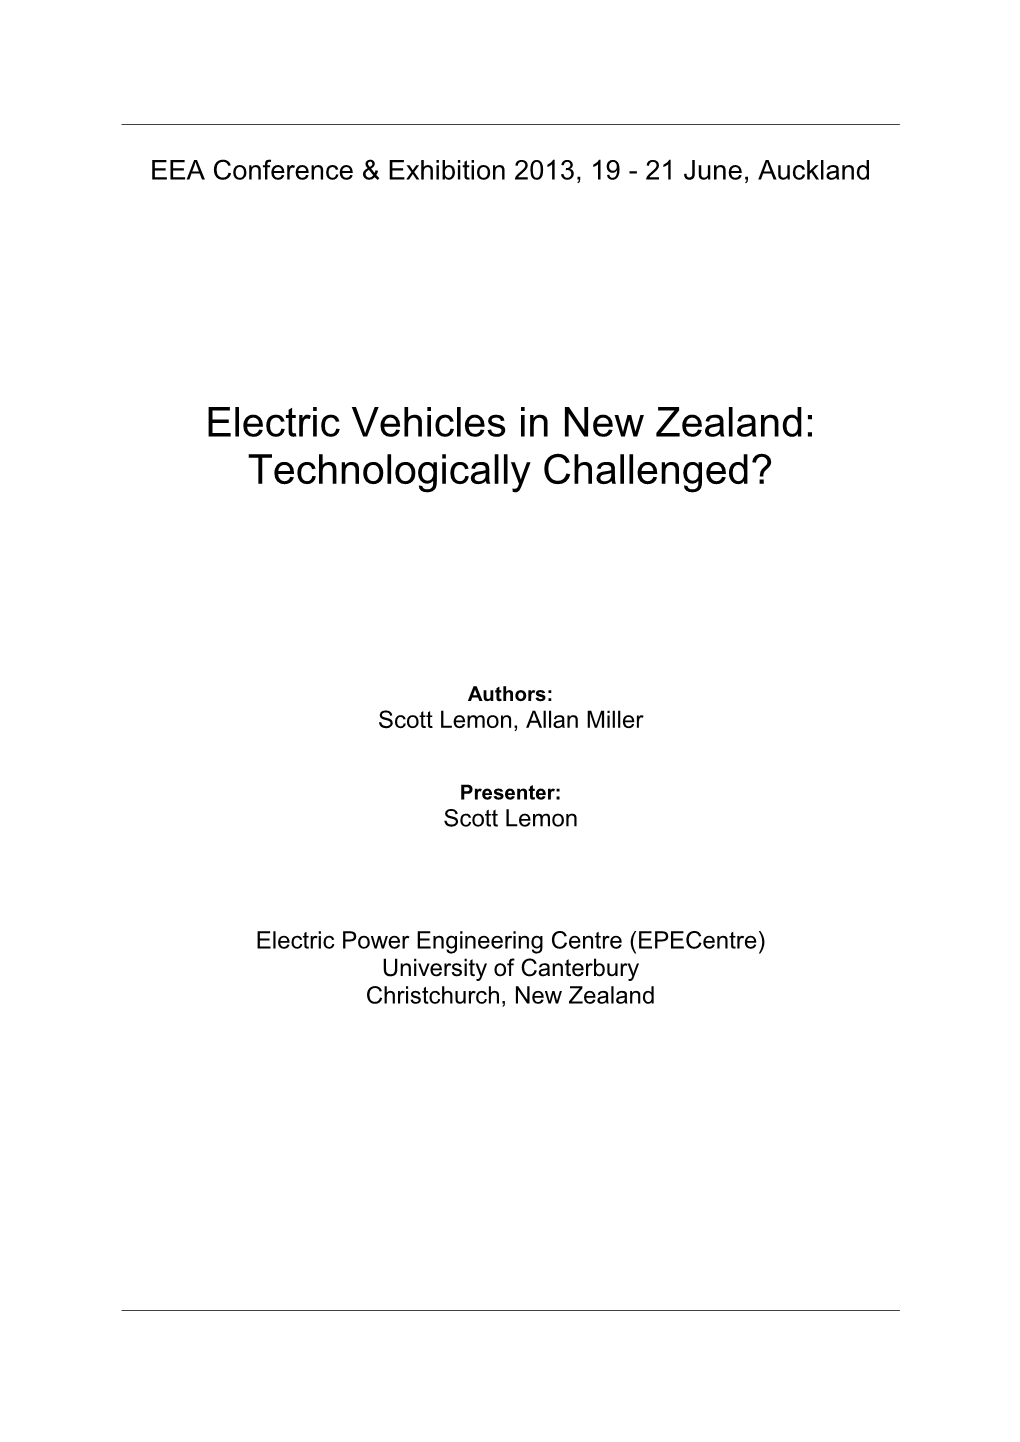 Electric Vehicles in New Zealand: Technologically Challenged?